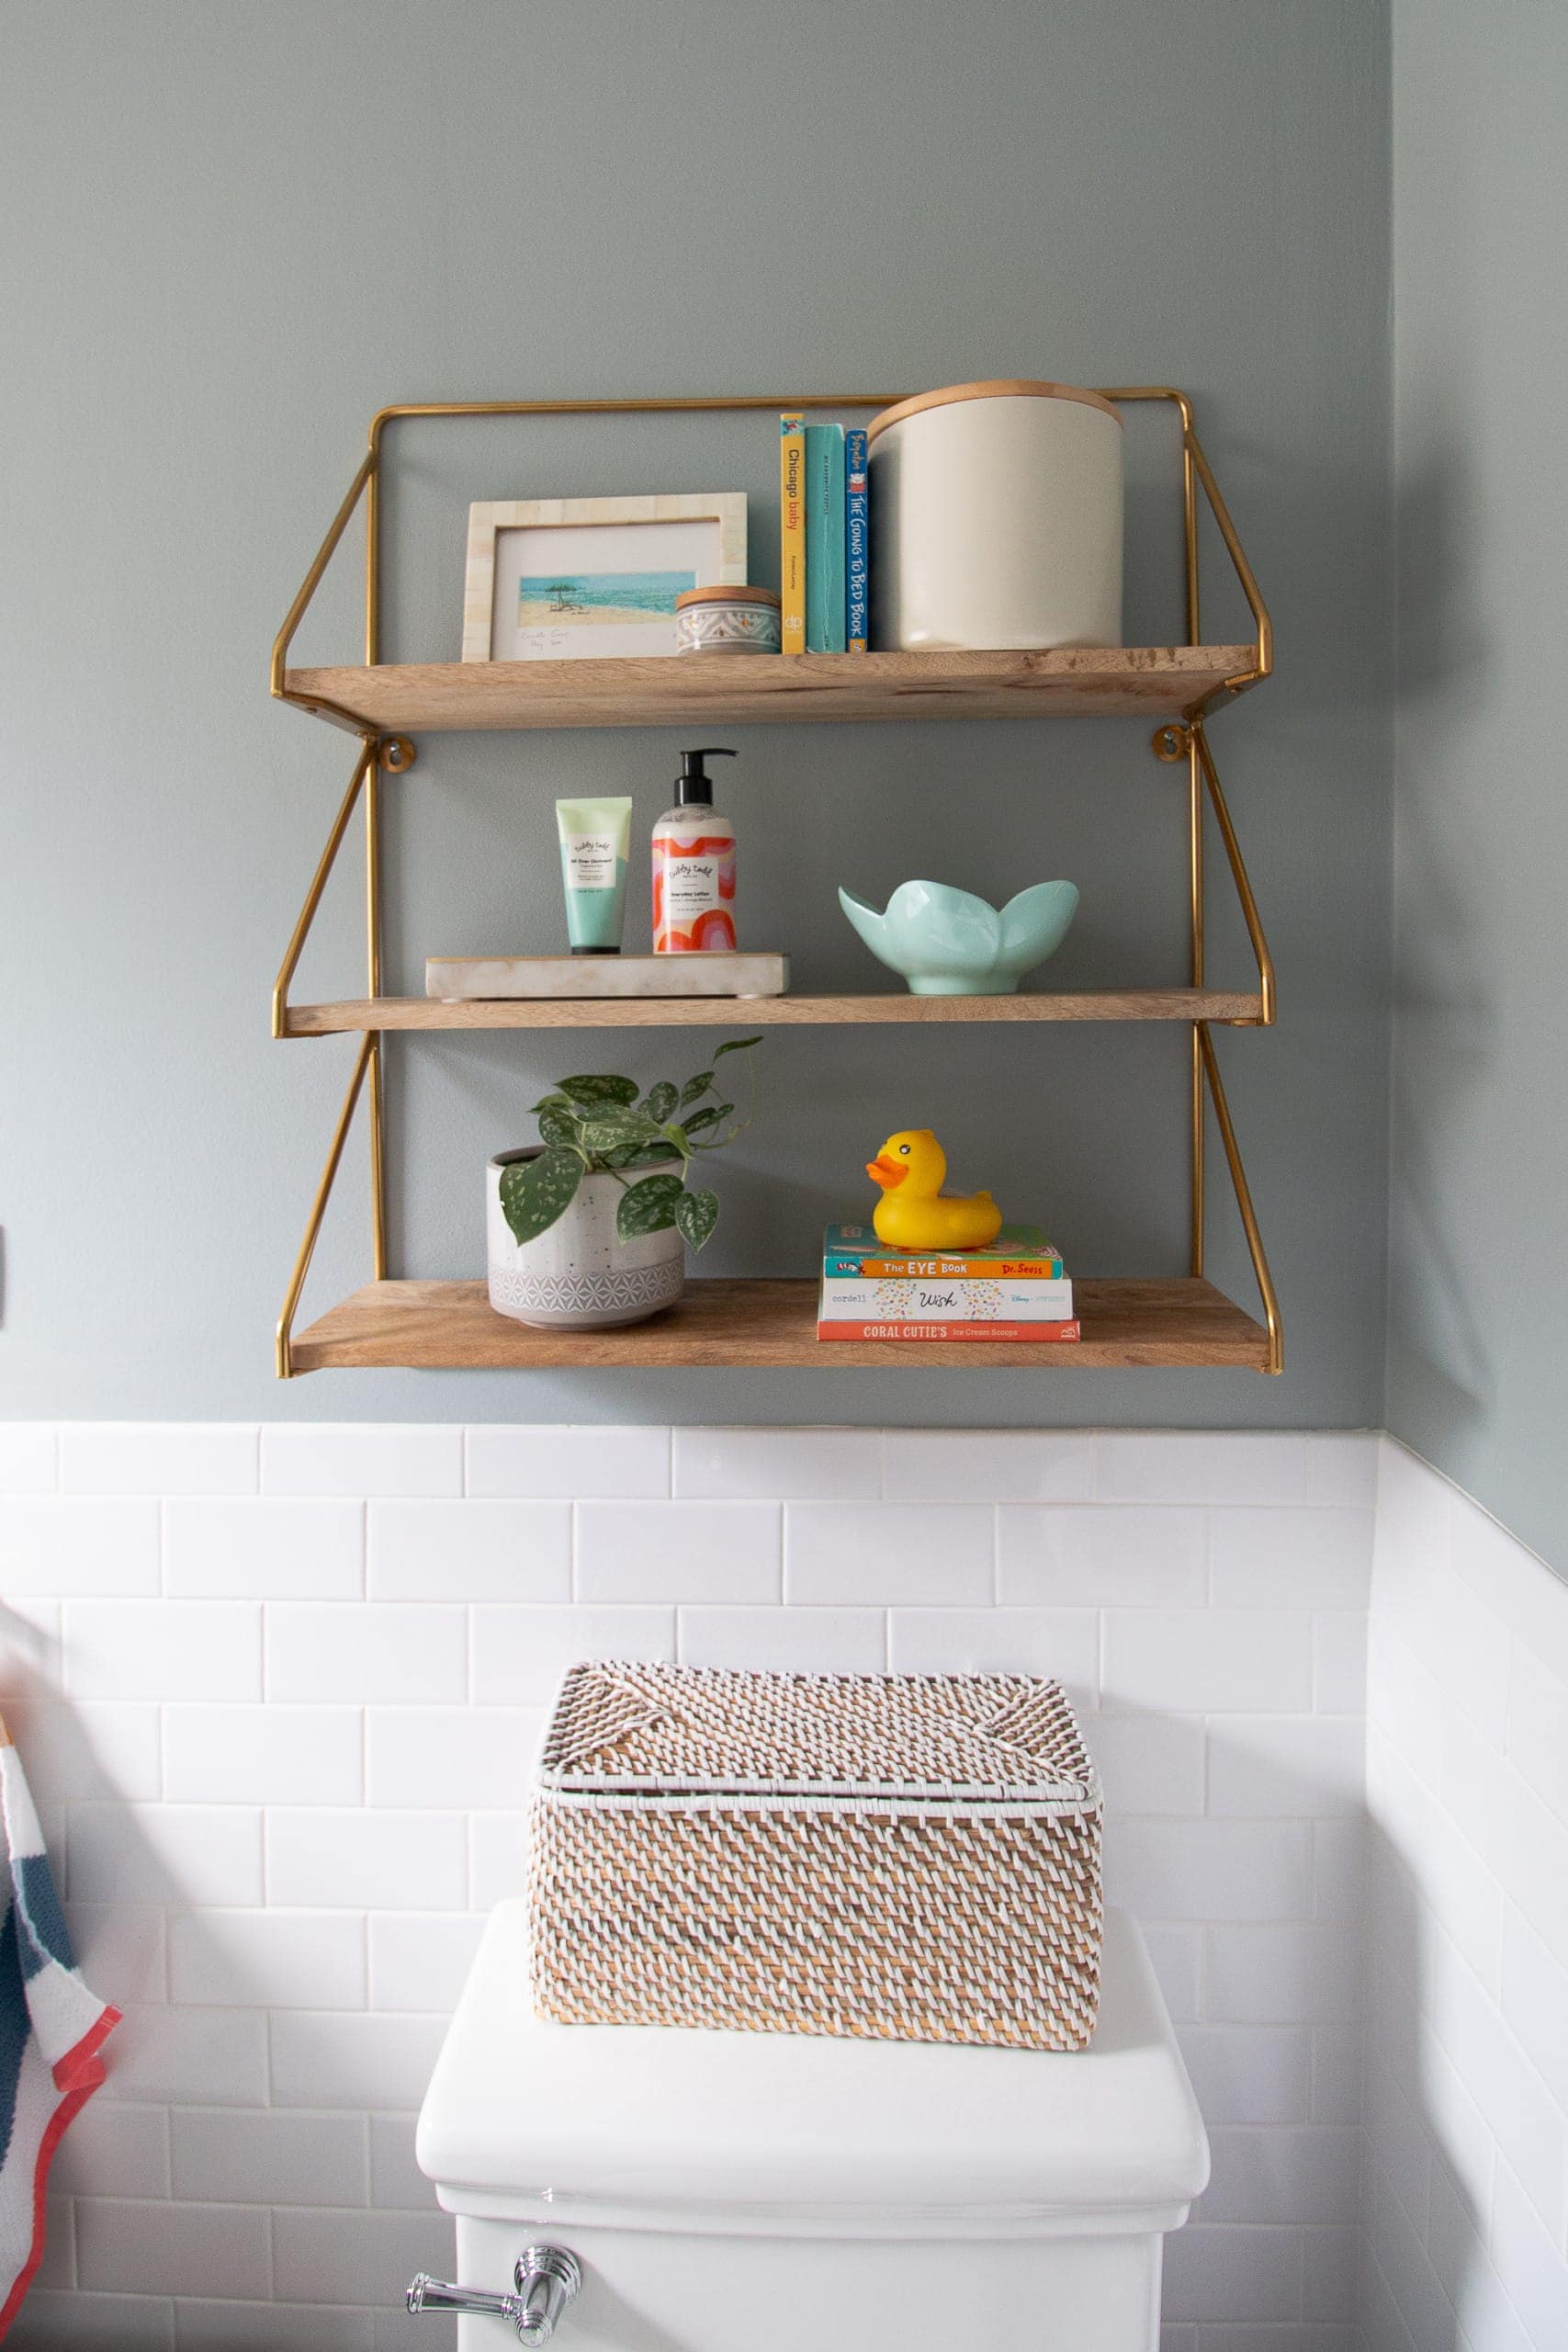 The shelving unit in our kids' bathroom